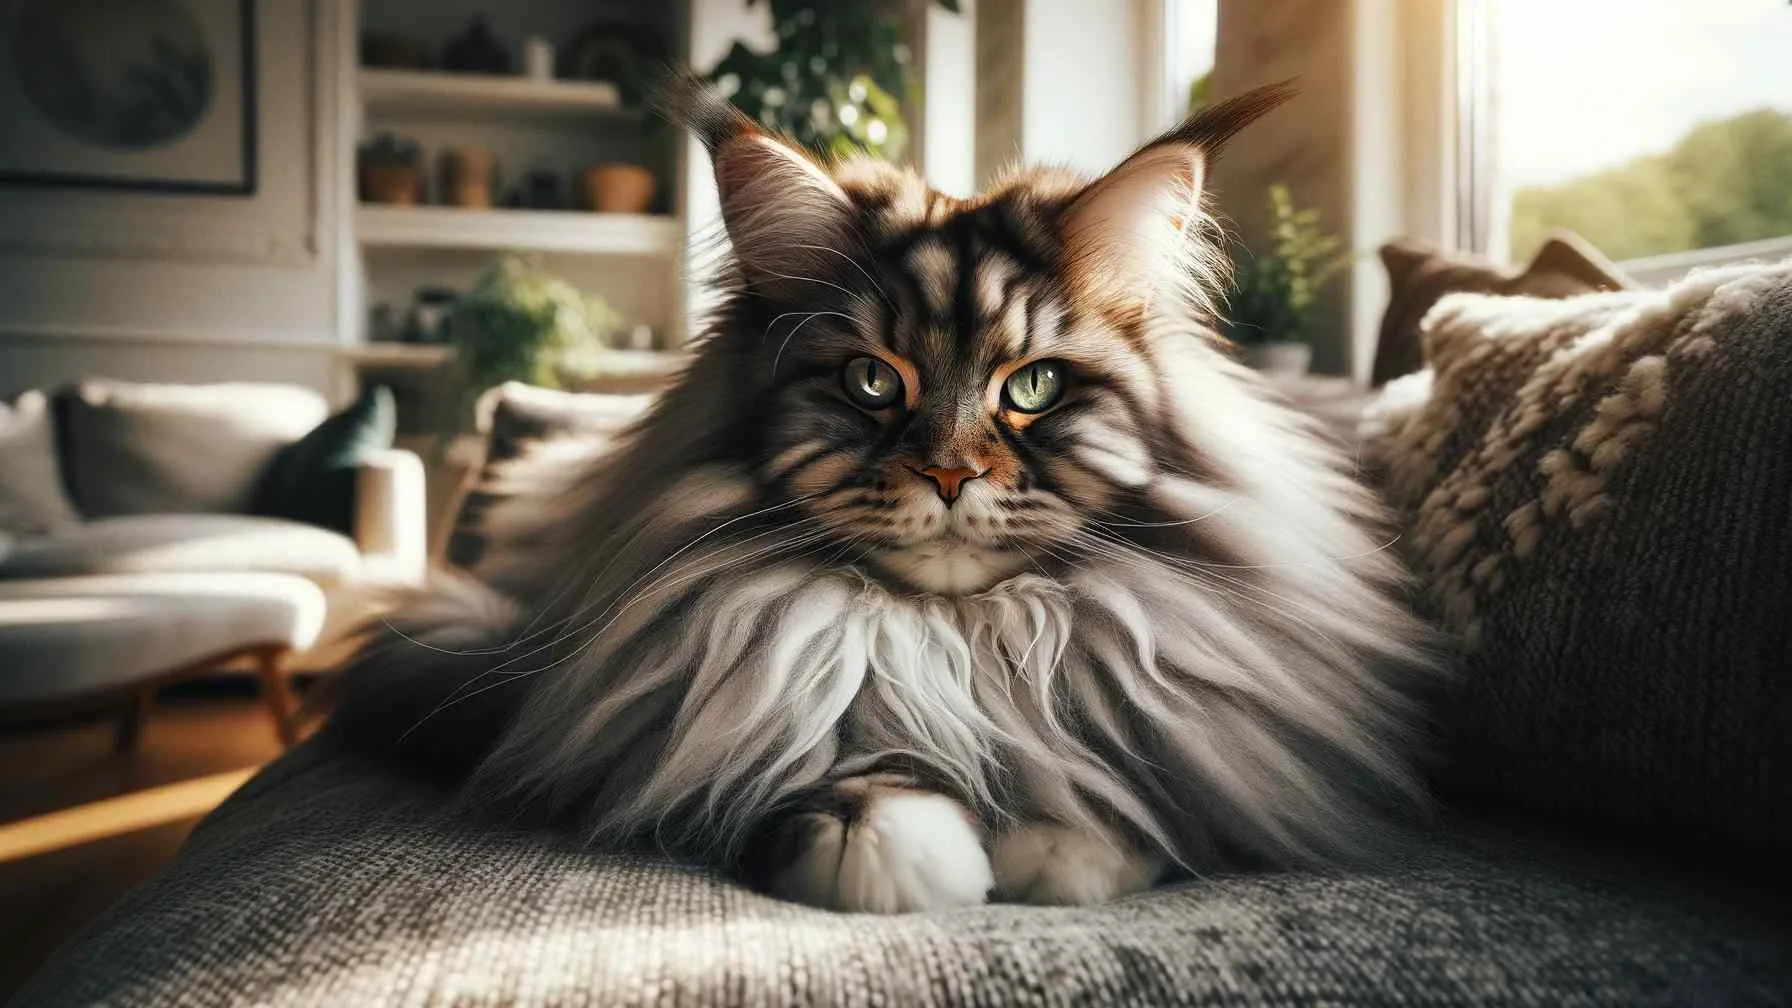 Majestic Maine Coon cat lounging indoors